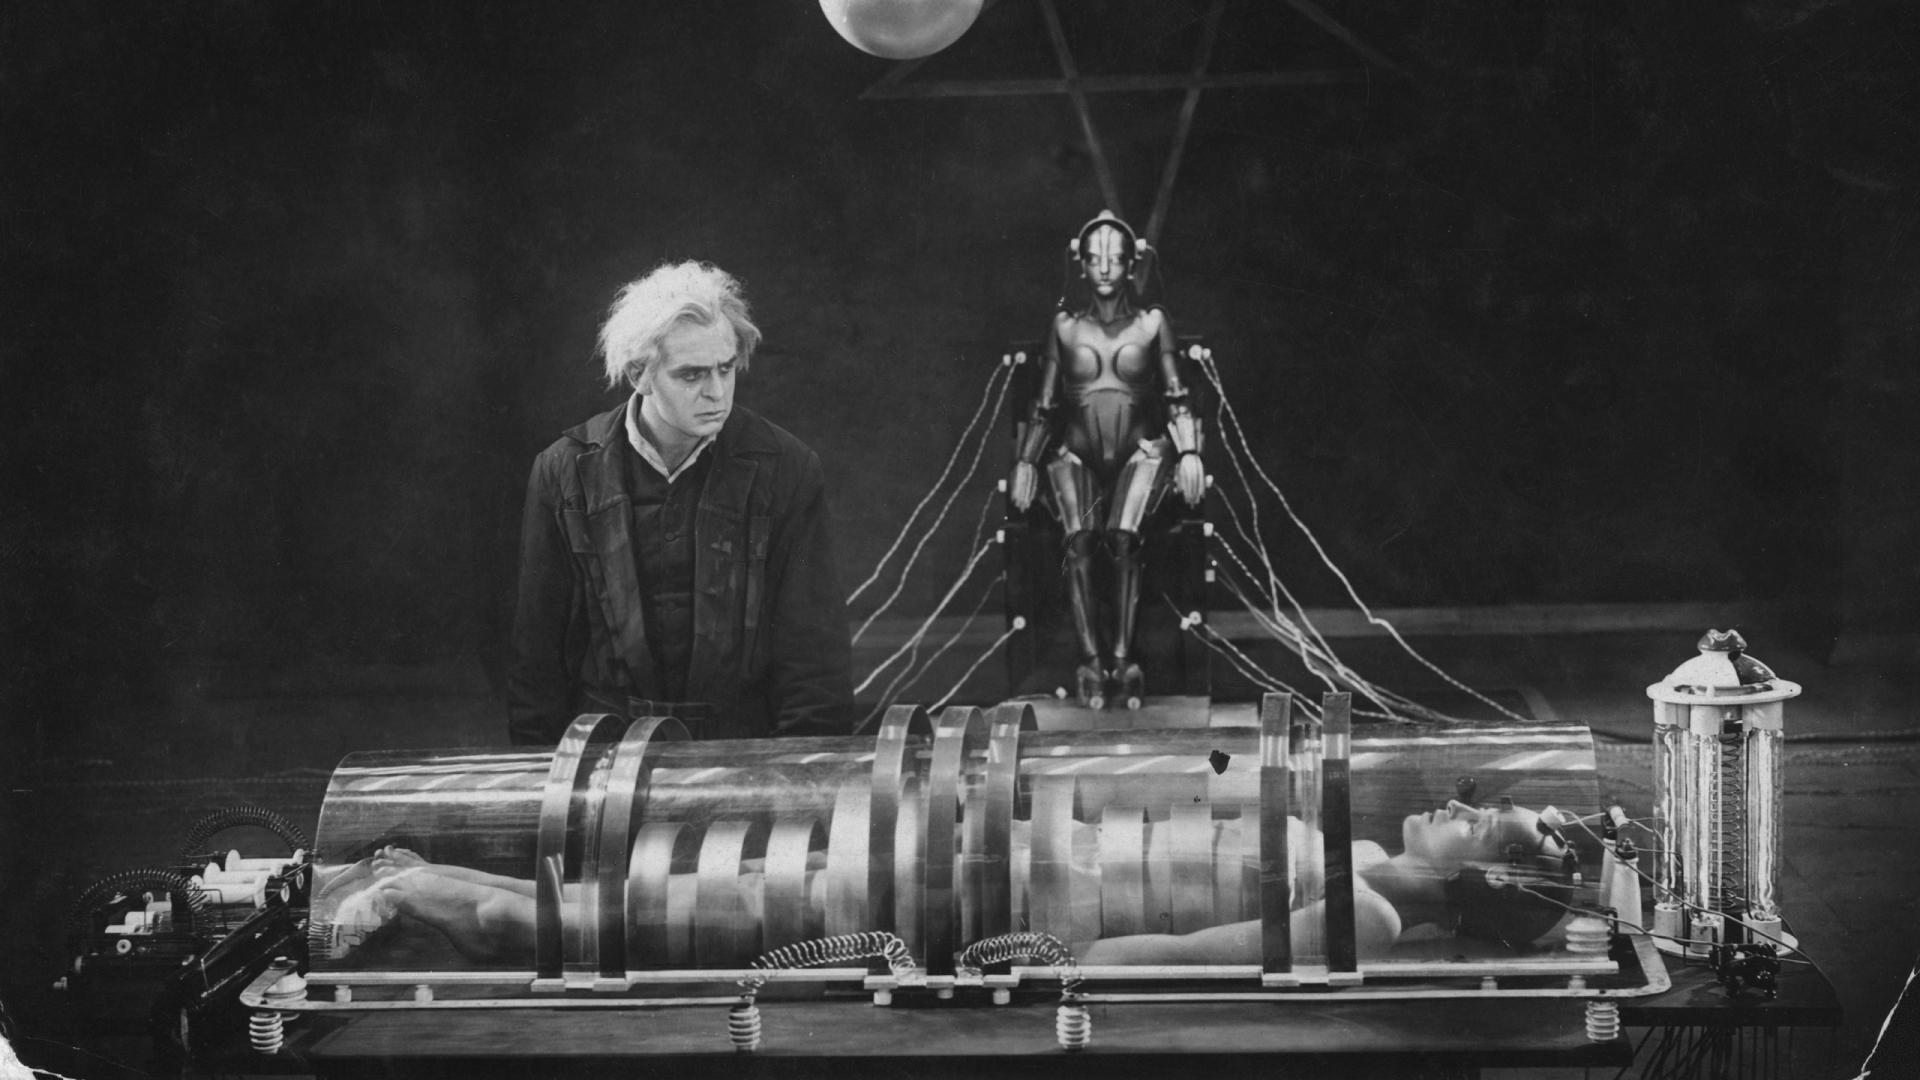 Film still from 'Metropolis'. A mad scientist looks over his robot/human hybrid creation in his underground laboratory.